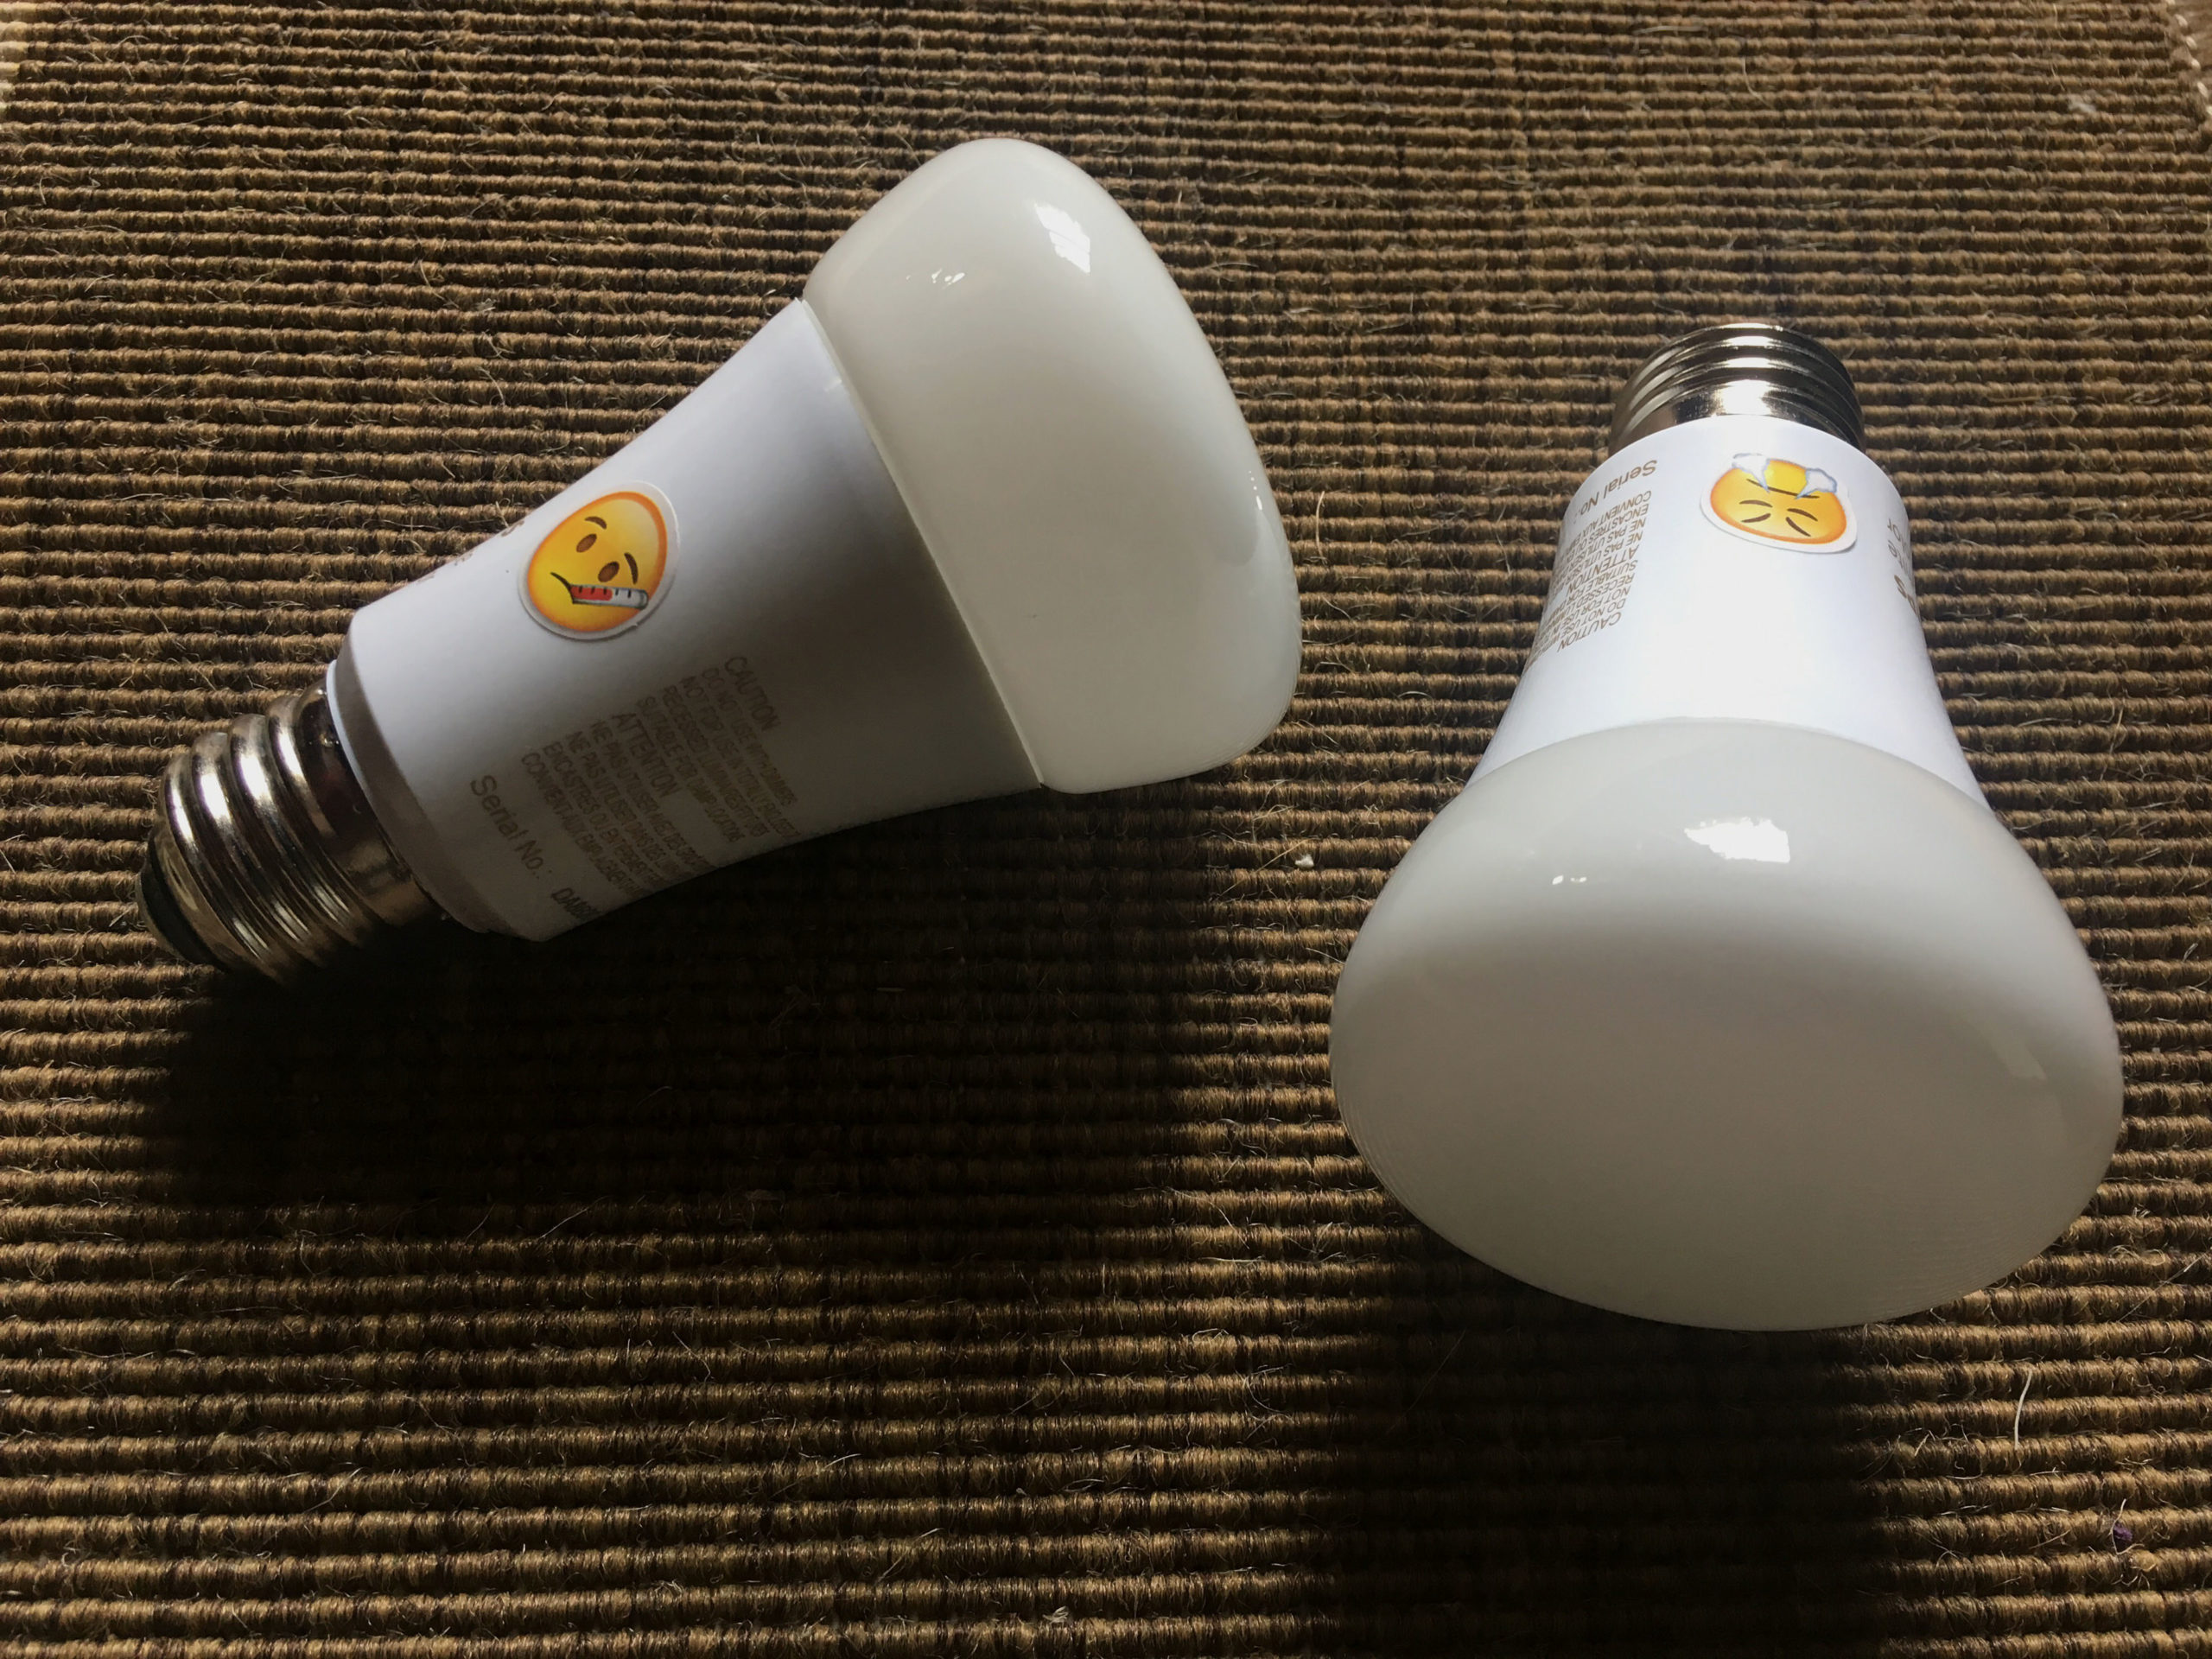 Manage Your Smart Lightbulbs With Emoji Stickers